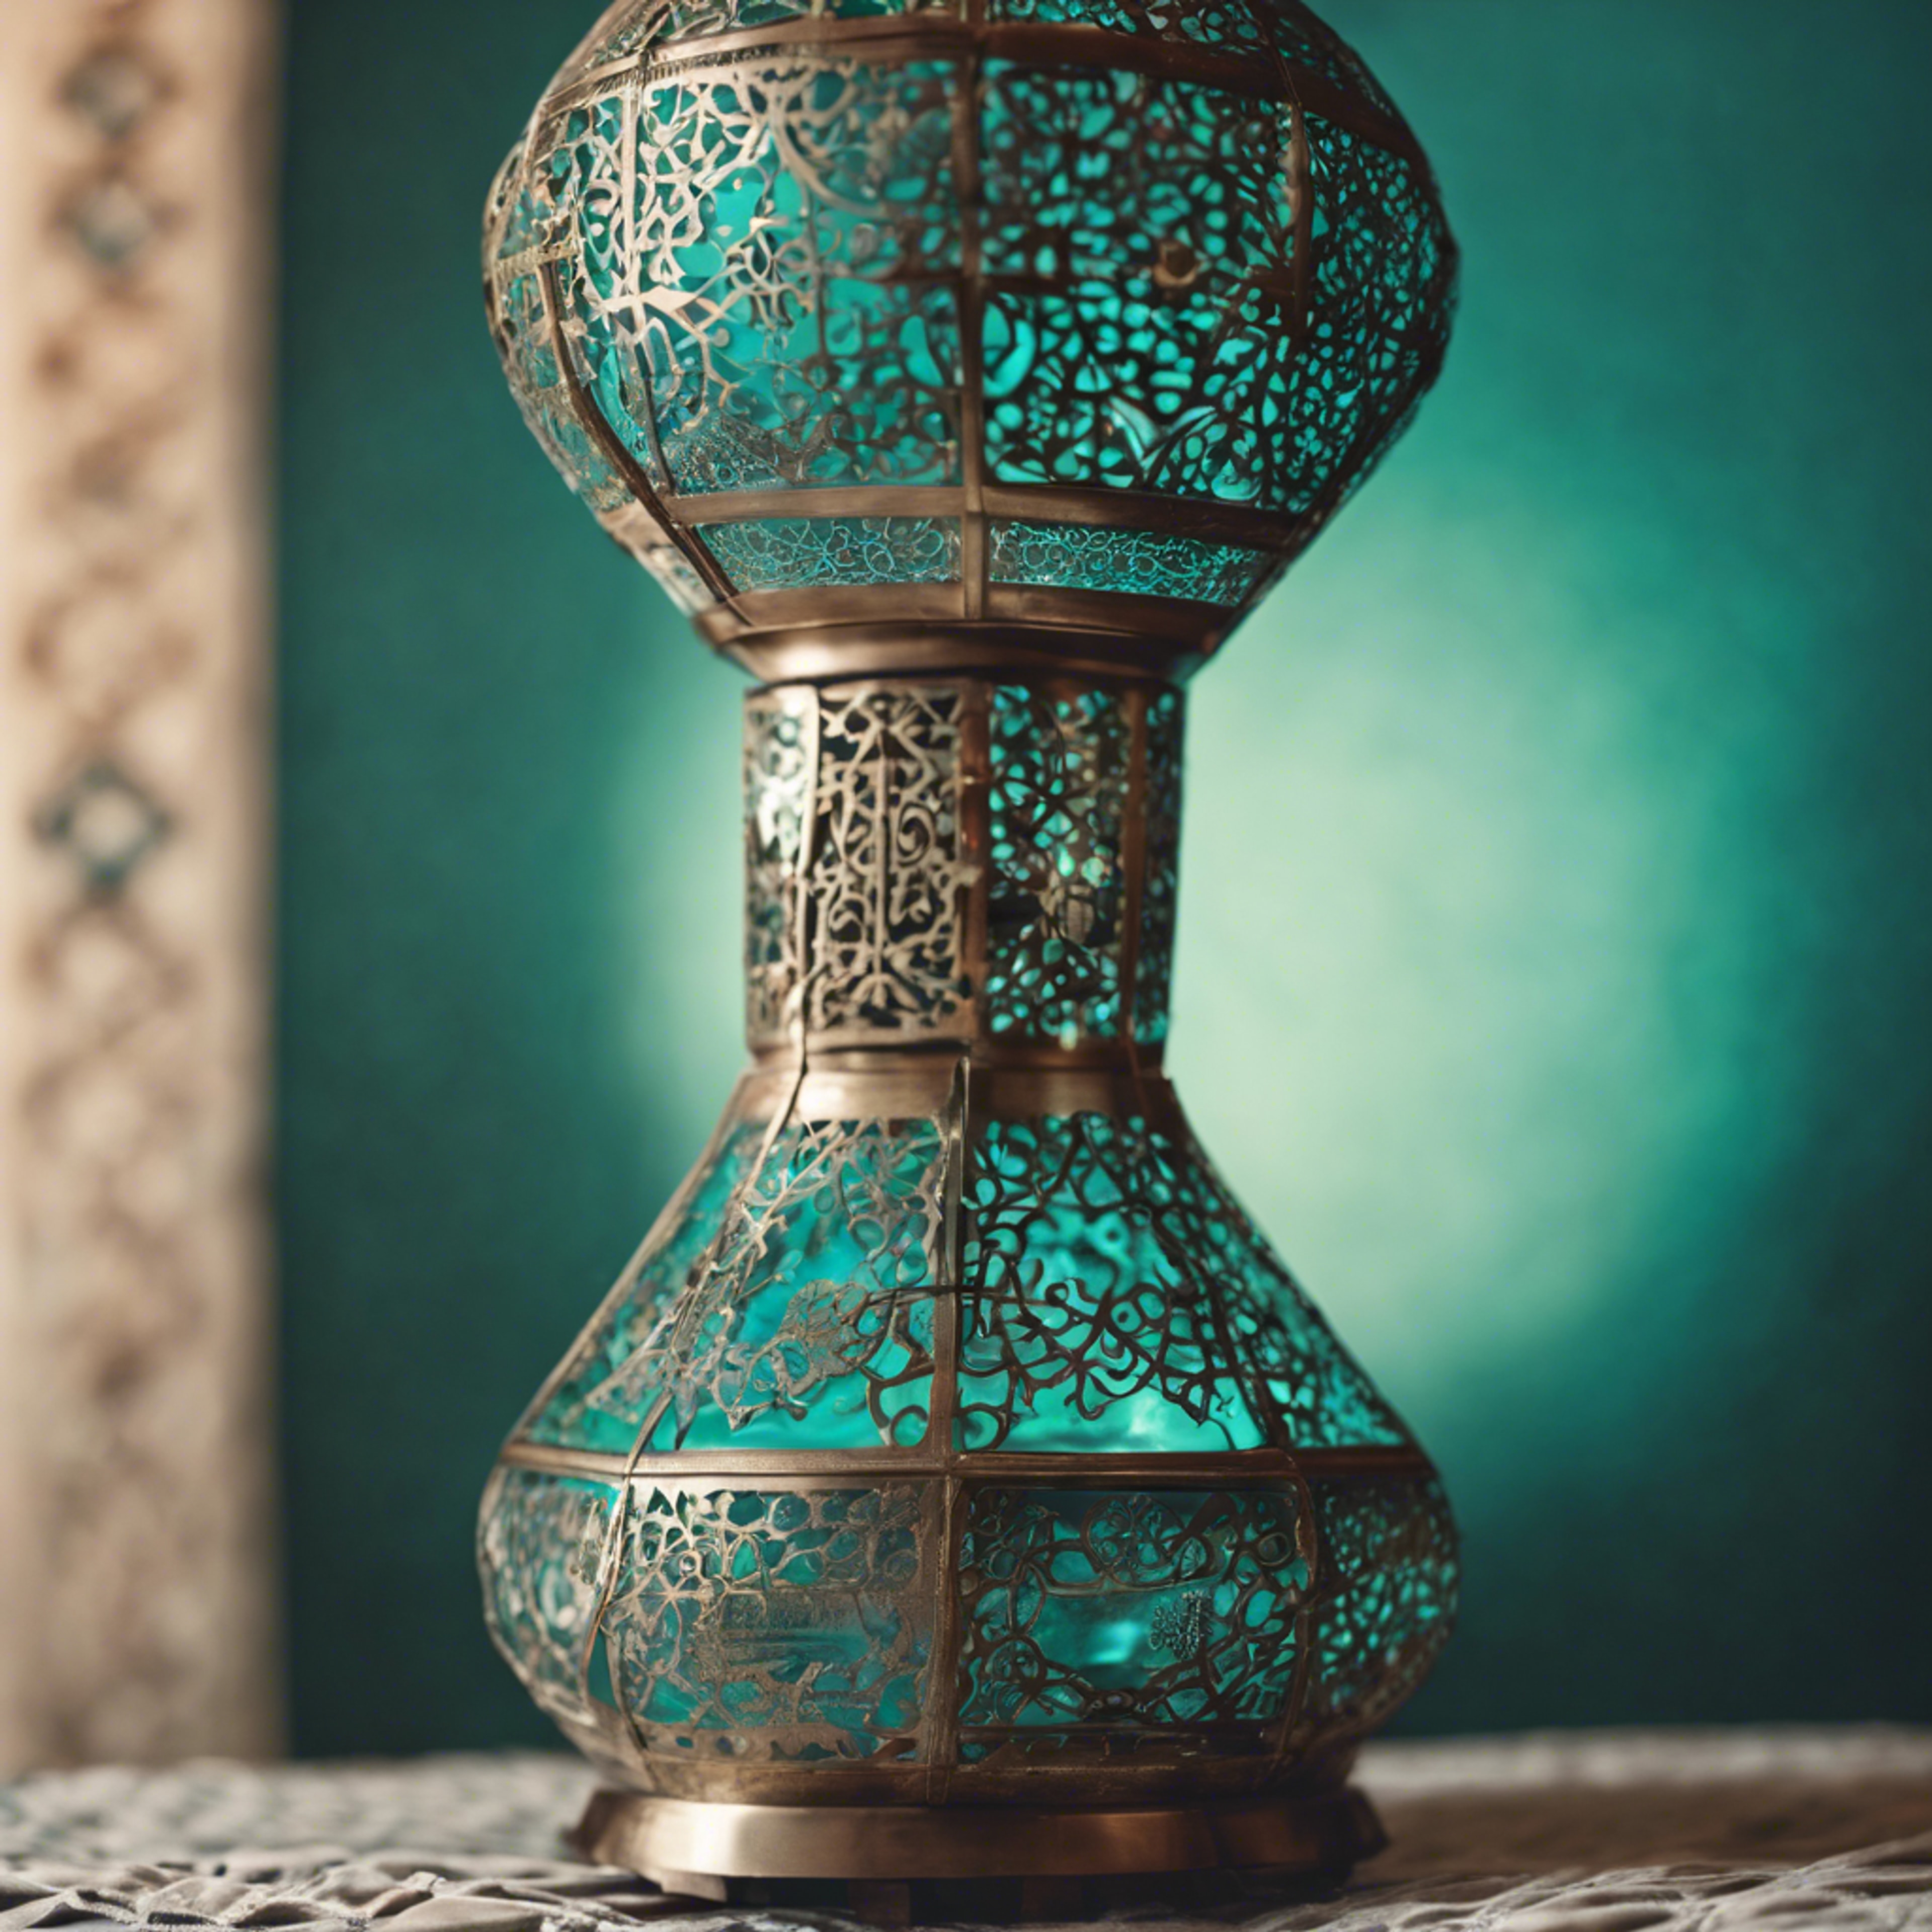 A traditional Moroccan lamp in a cool teal color. Kertas dinding[a27f0371dbce4744aca5]